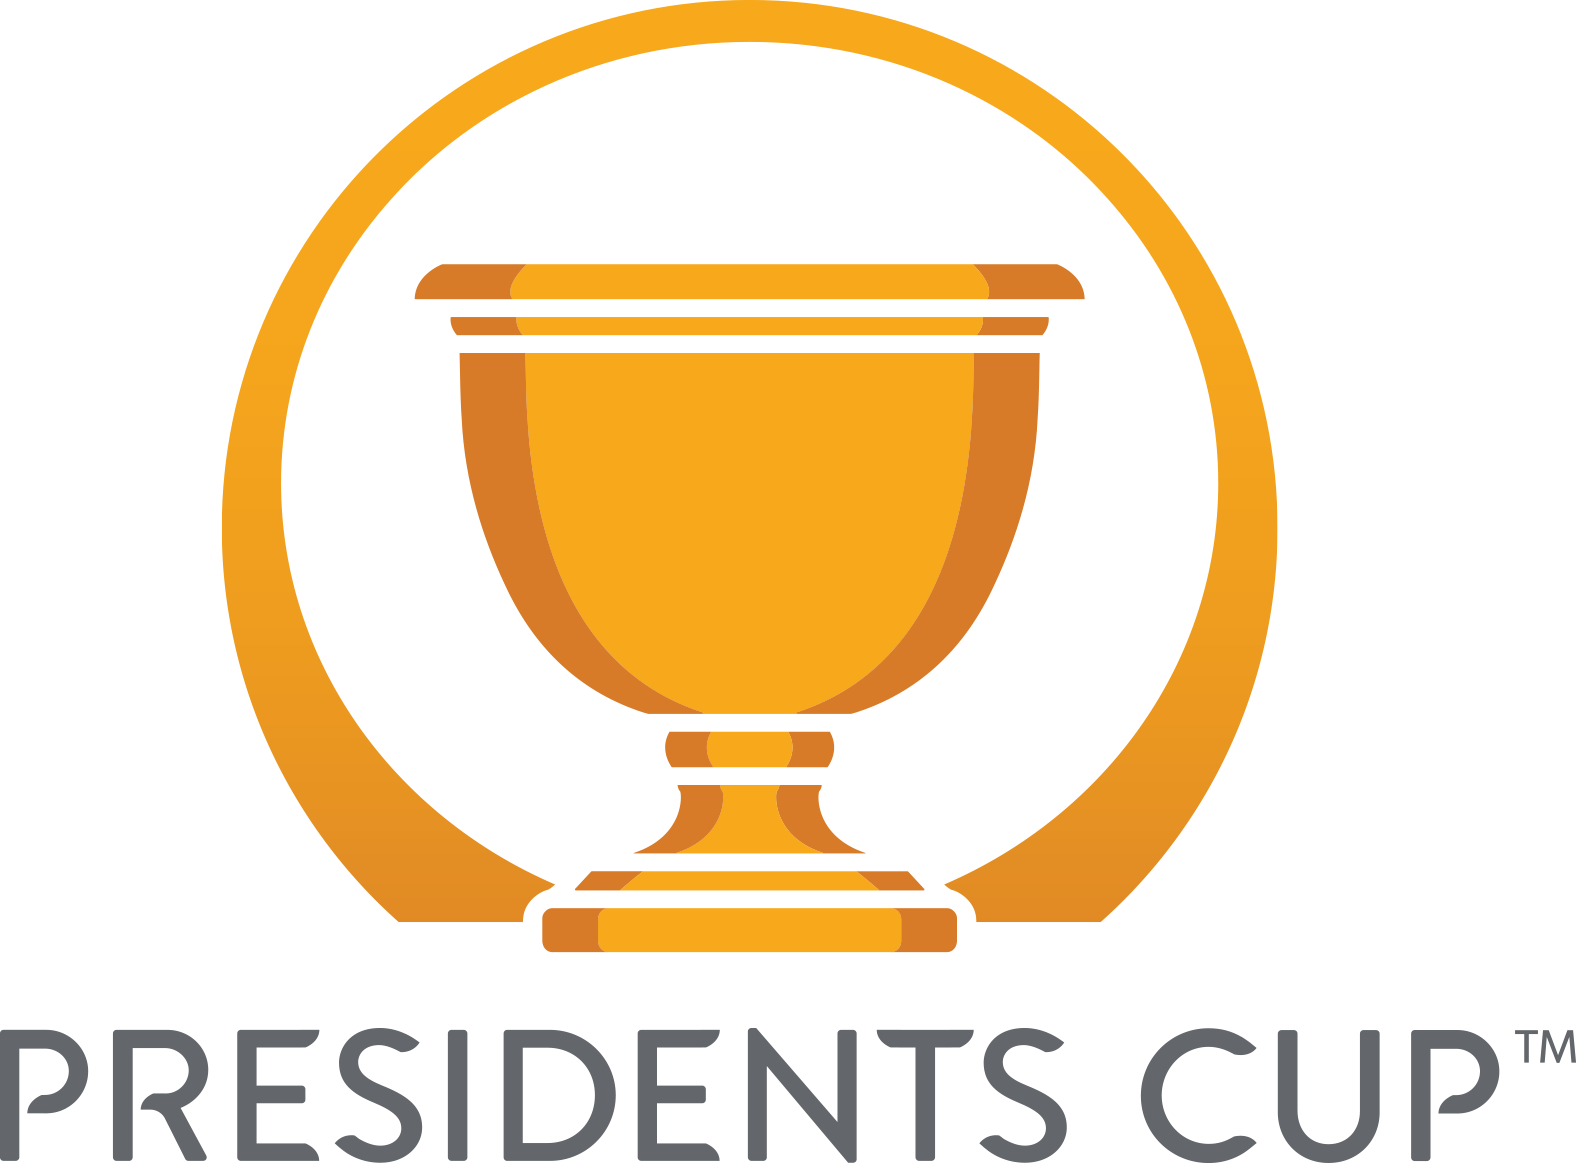 Presidents Cup logo and illustration